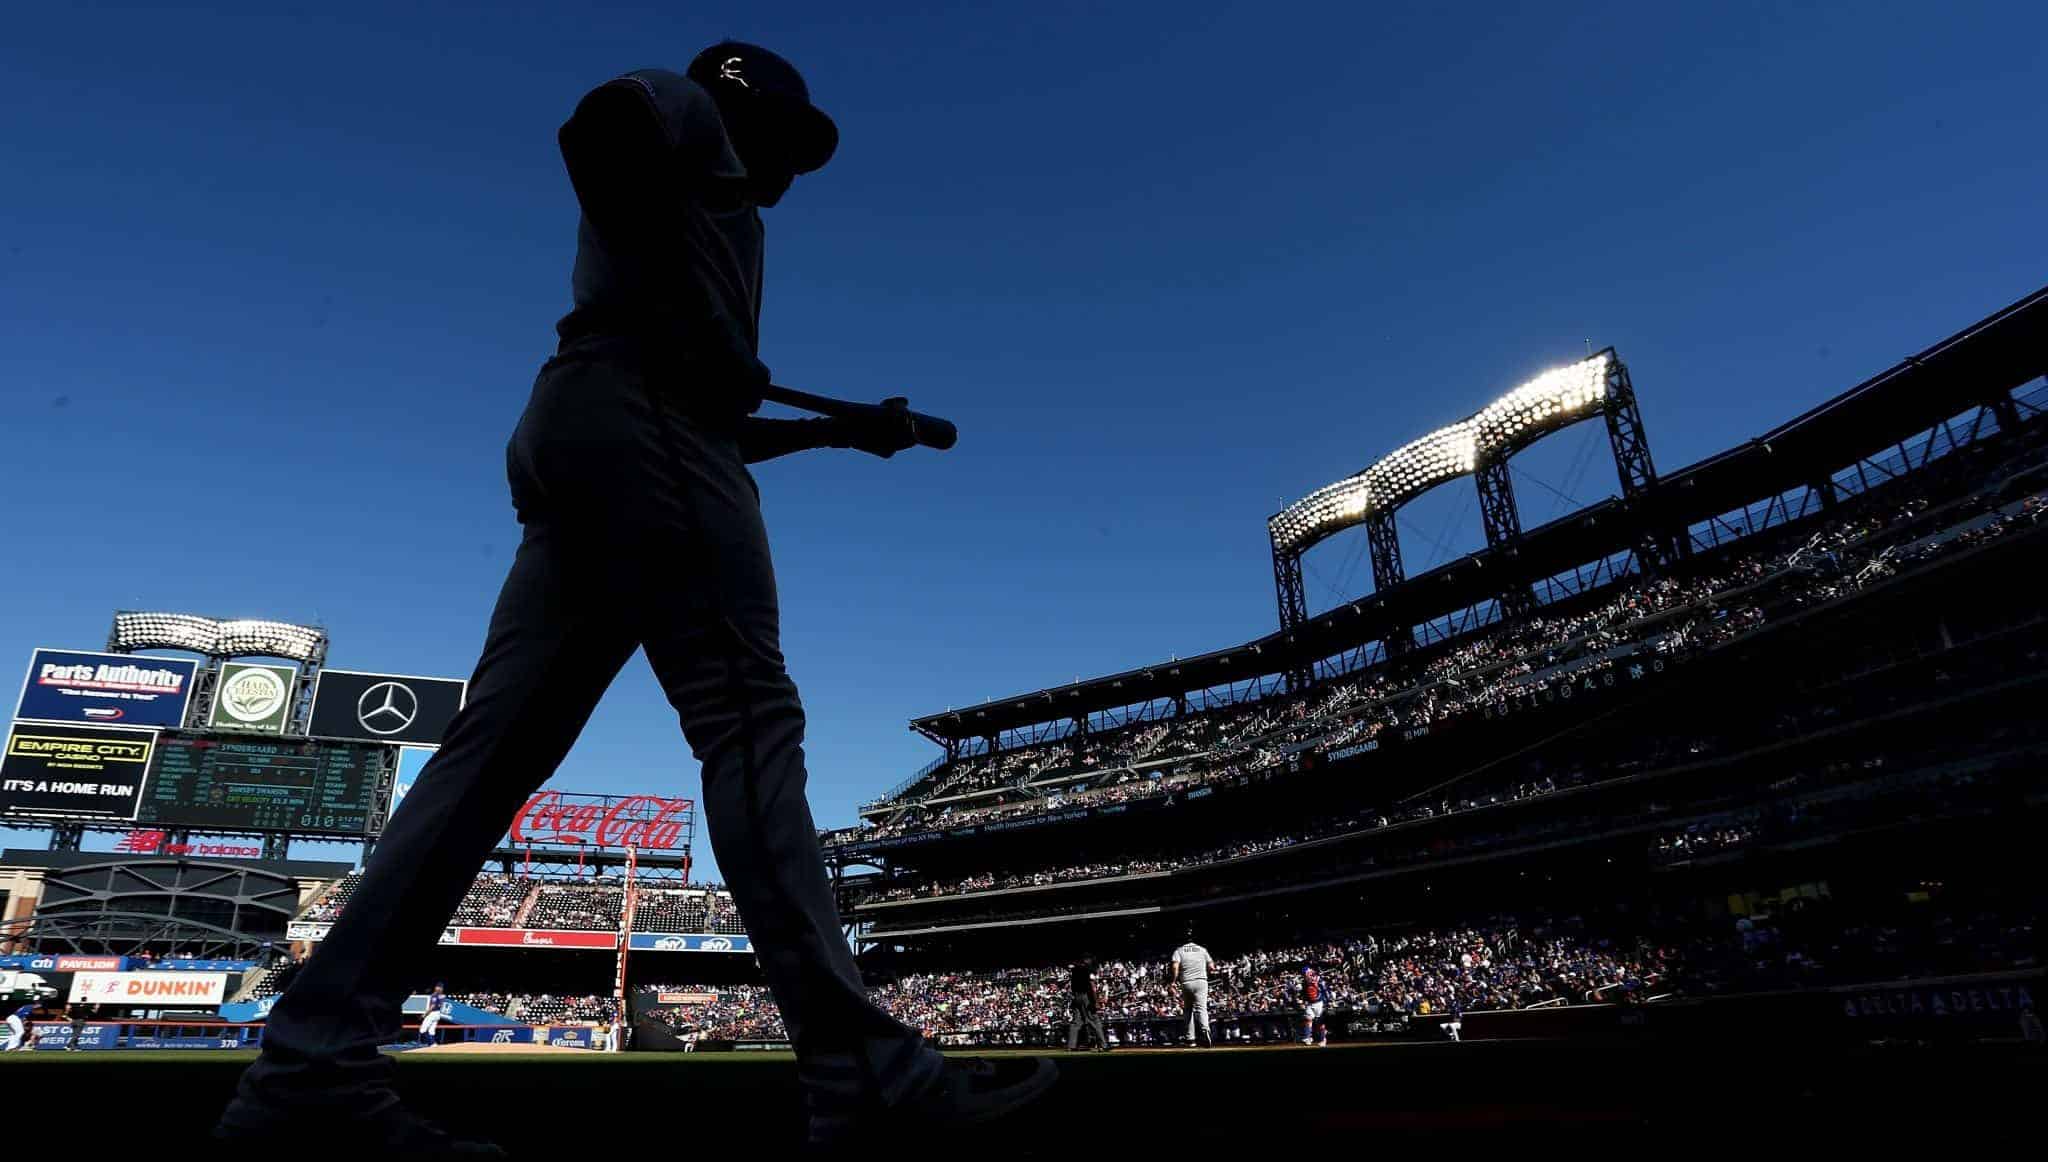 NEW YORK, NEW YORK - SEPTEMBER 29: Freddie Freeman #5 of the Atlanta Braves walks up tp the on-deck circle prior to his at bat against the New York Mets at Citi Field on September 29, 2019 in New York City.